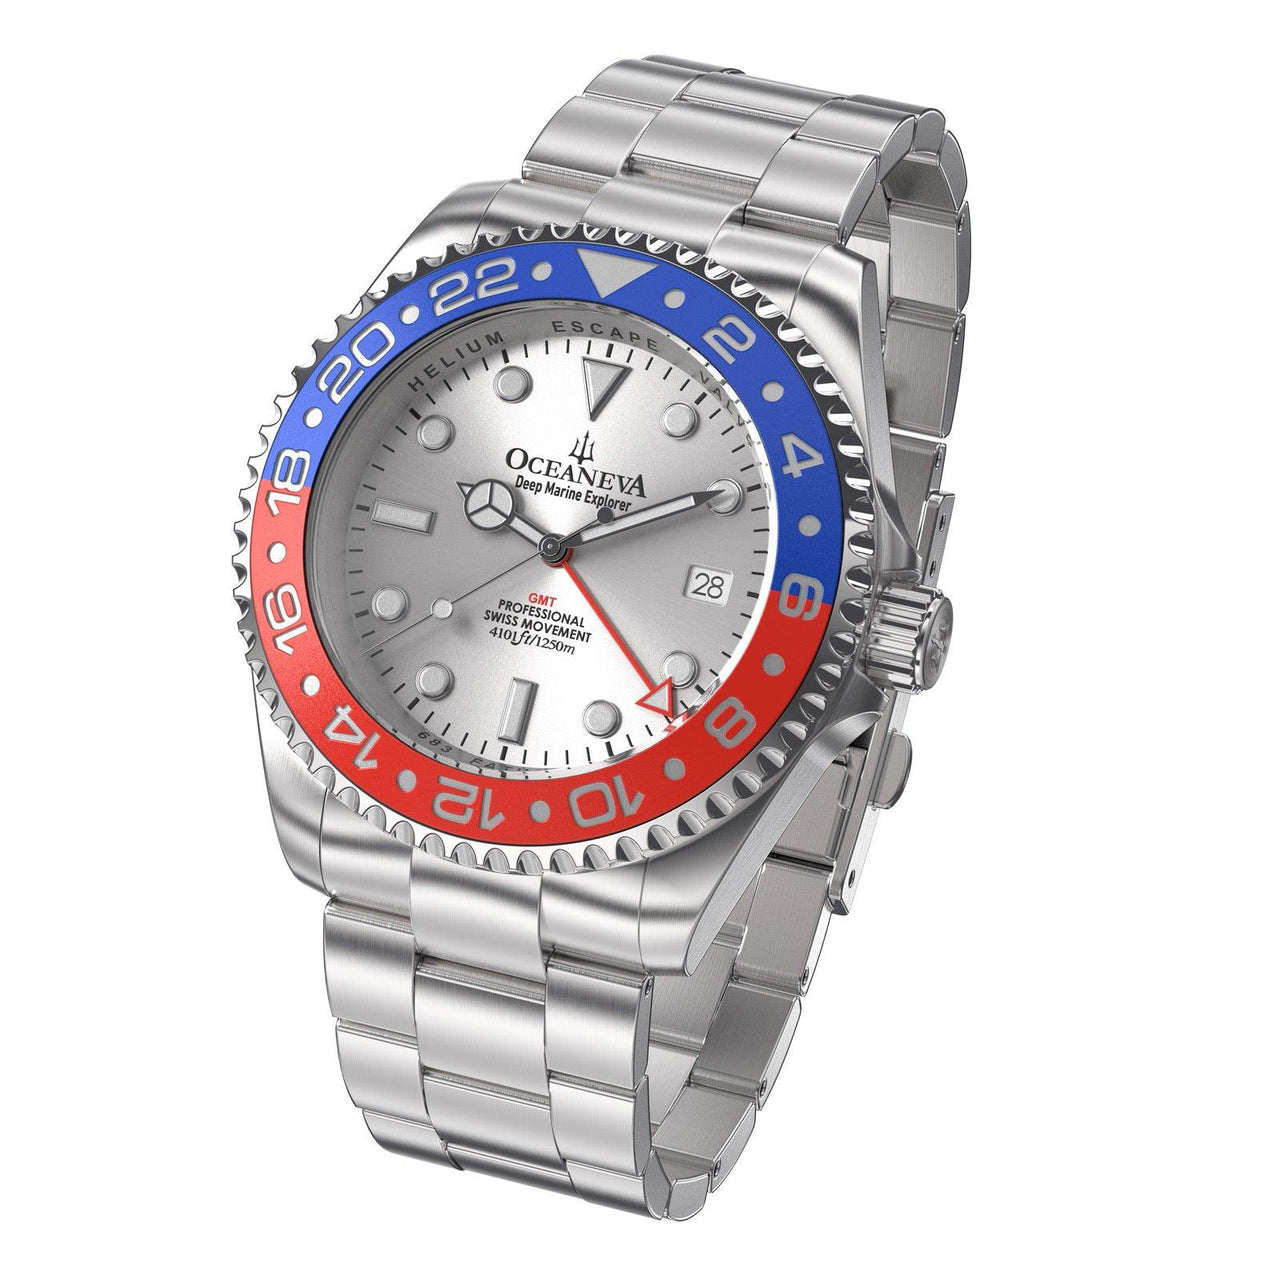 Oceaneva 1250M GMT Dive Watch Silver Blue And Red Front Picture Slight Left Slant View